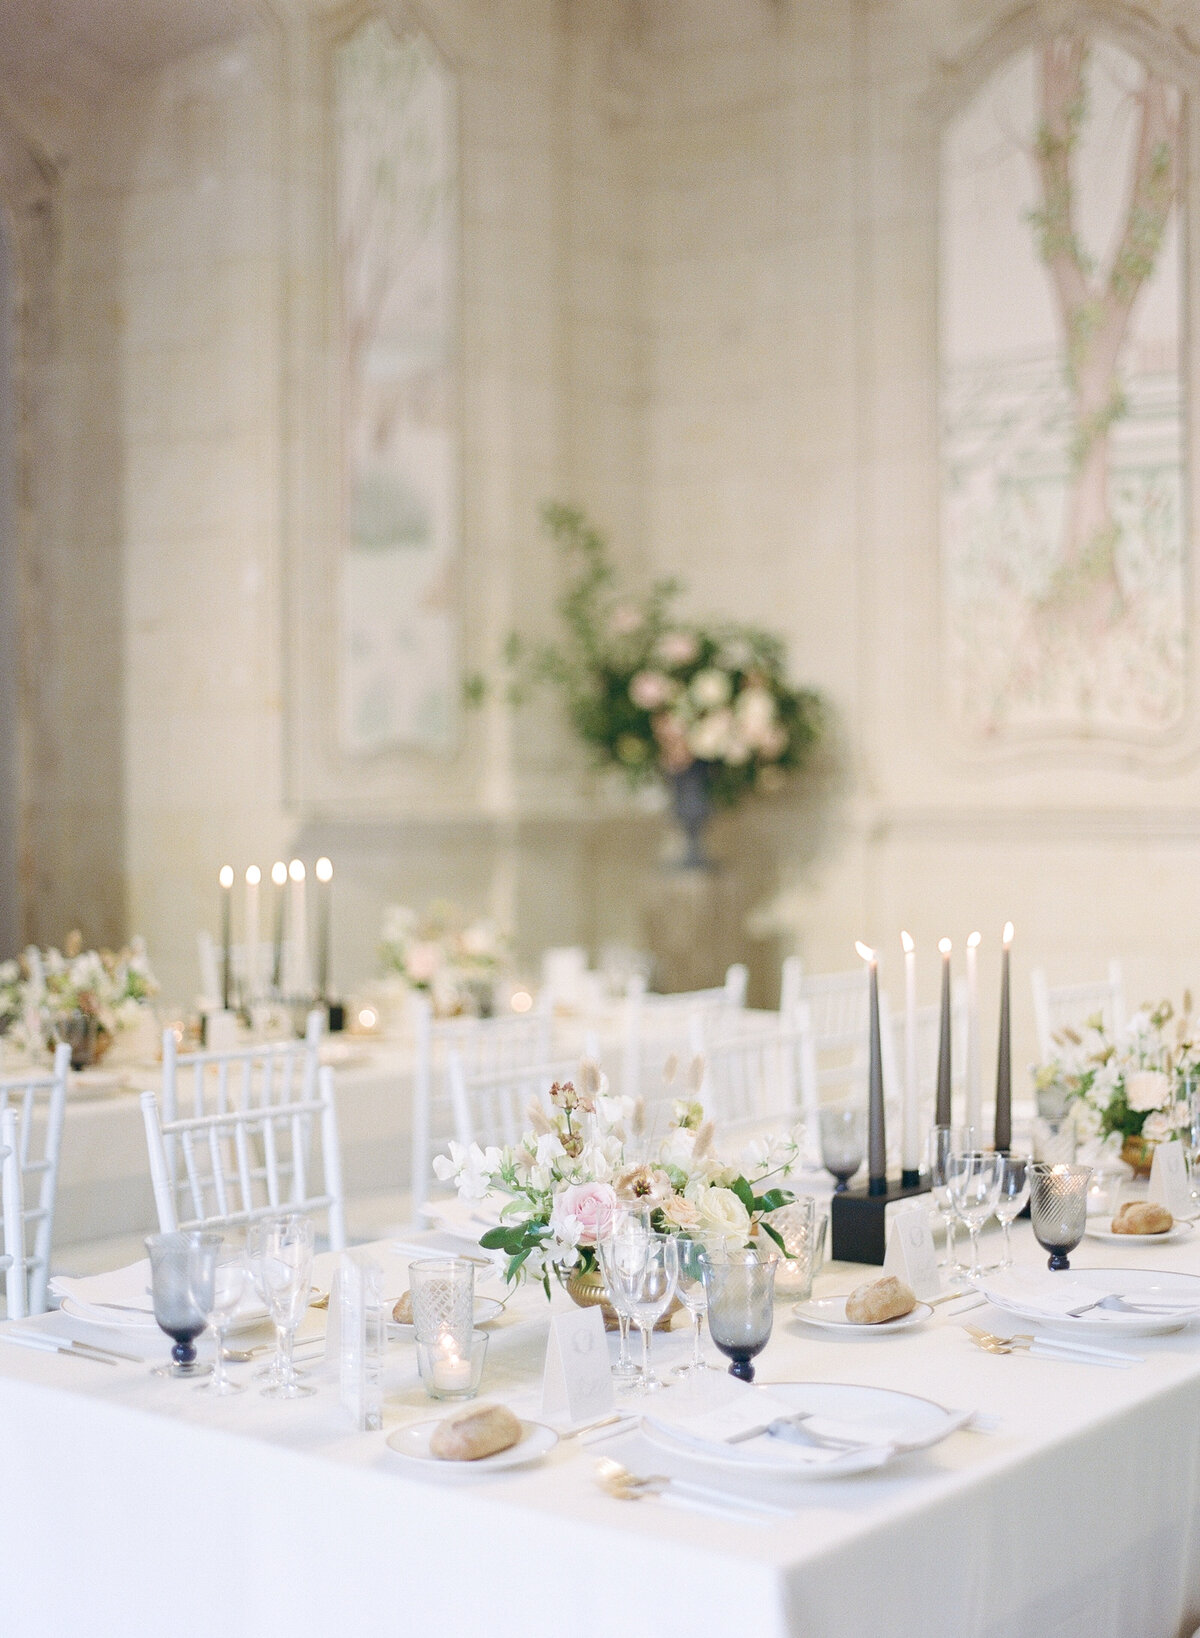 Jennifer Fox Weddings English speaking wedding planning & design agency in France crafting refined and bespoke weddings and celebrations Provence, Paris and destination Molly-Carr-Photography-Natalie-Ryan-Dinner-32